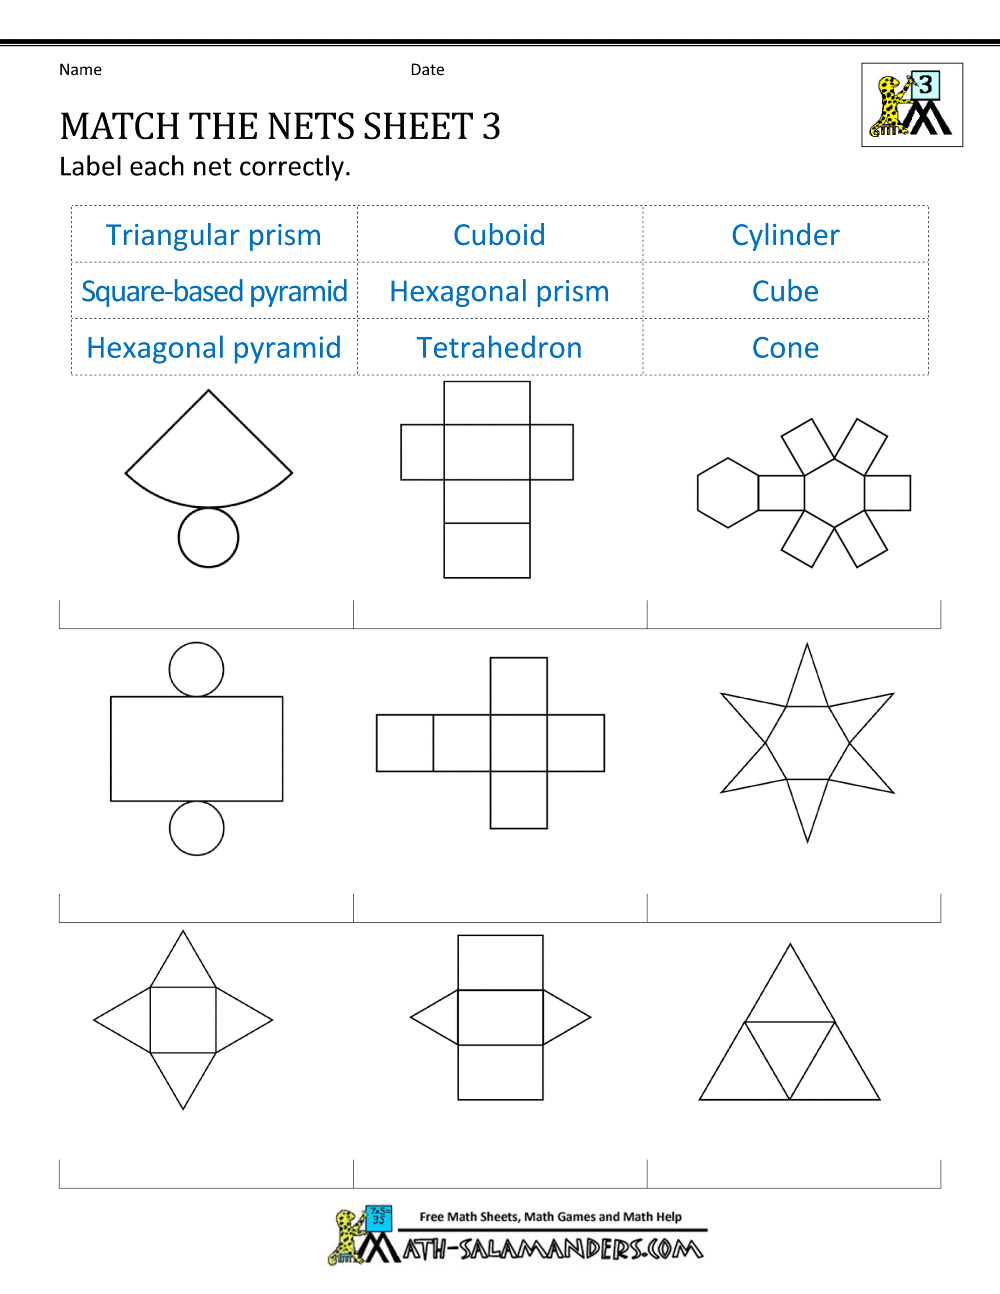 Geometry Nets Information Page printable worksheets, math worksheets, multiplication, education, free worksheets, and worksheets Nets Of 3d Shapes Worksheets 1294 x 1000